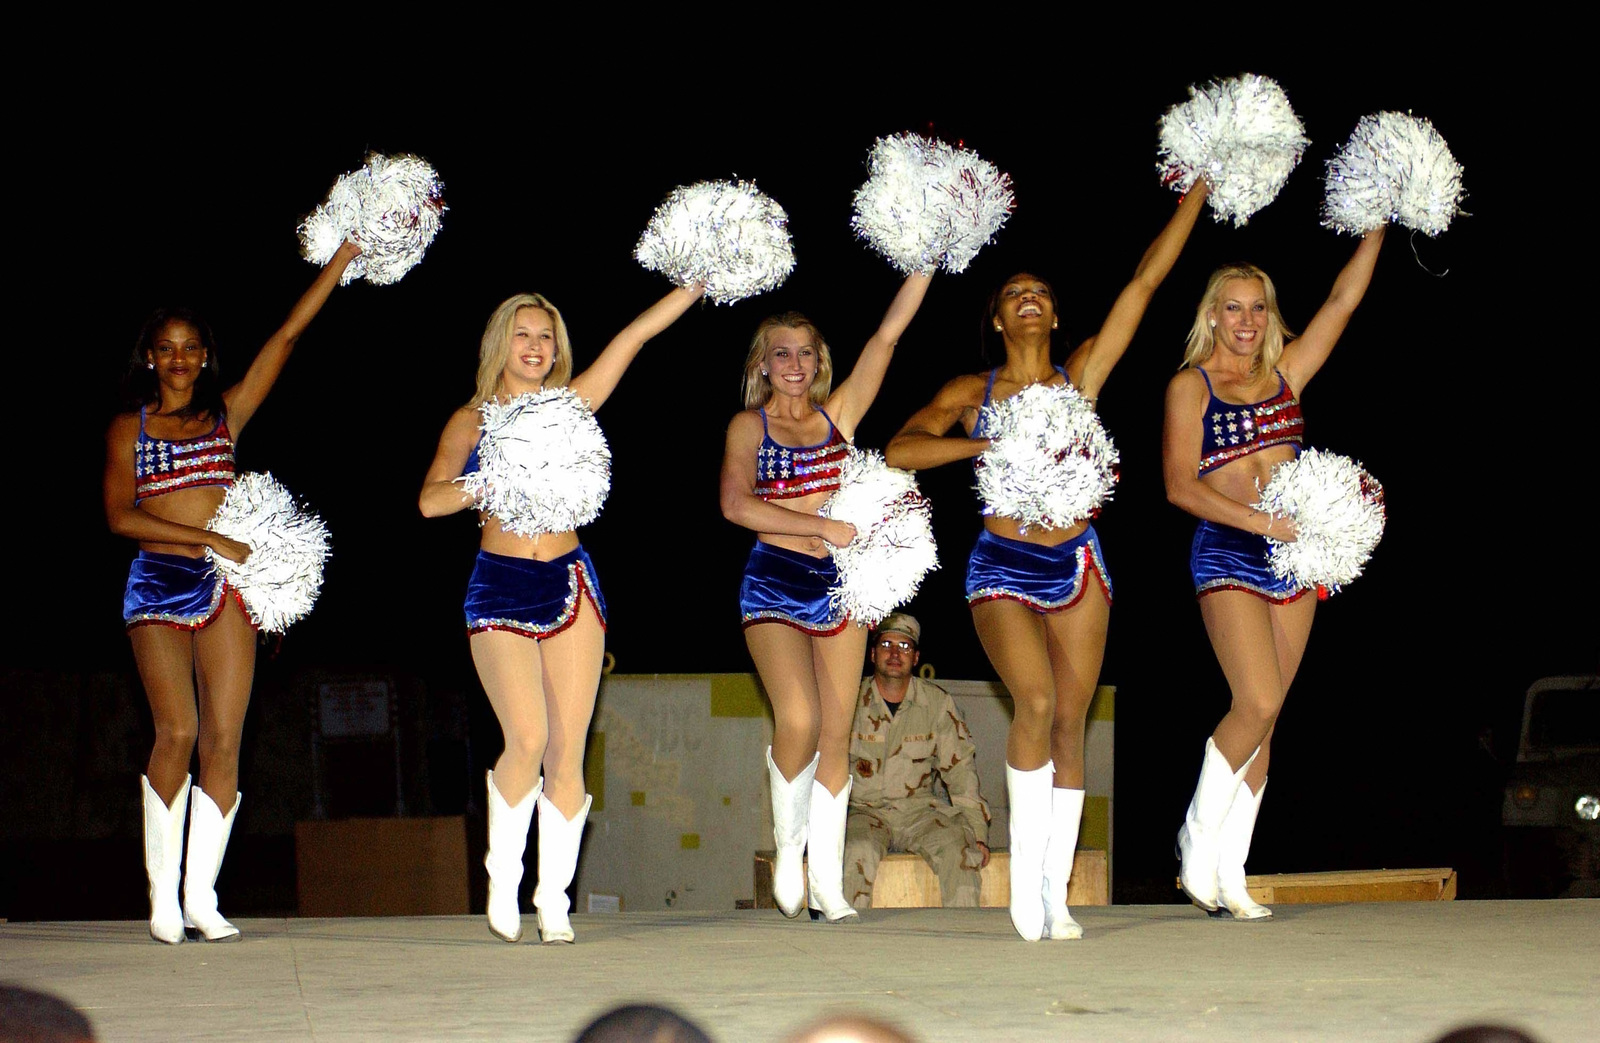 The Washington Redskins Cheerleaders and Wizards Dancers combine to perform  a variety show for the deployed members of the 438th Air Expeditionary  Group (AEG) at a forward-deployed location during Operation ENDURING  FREEDOM.